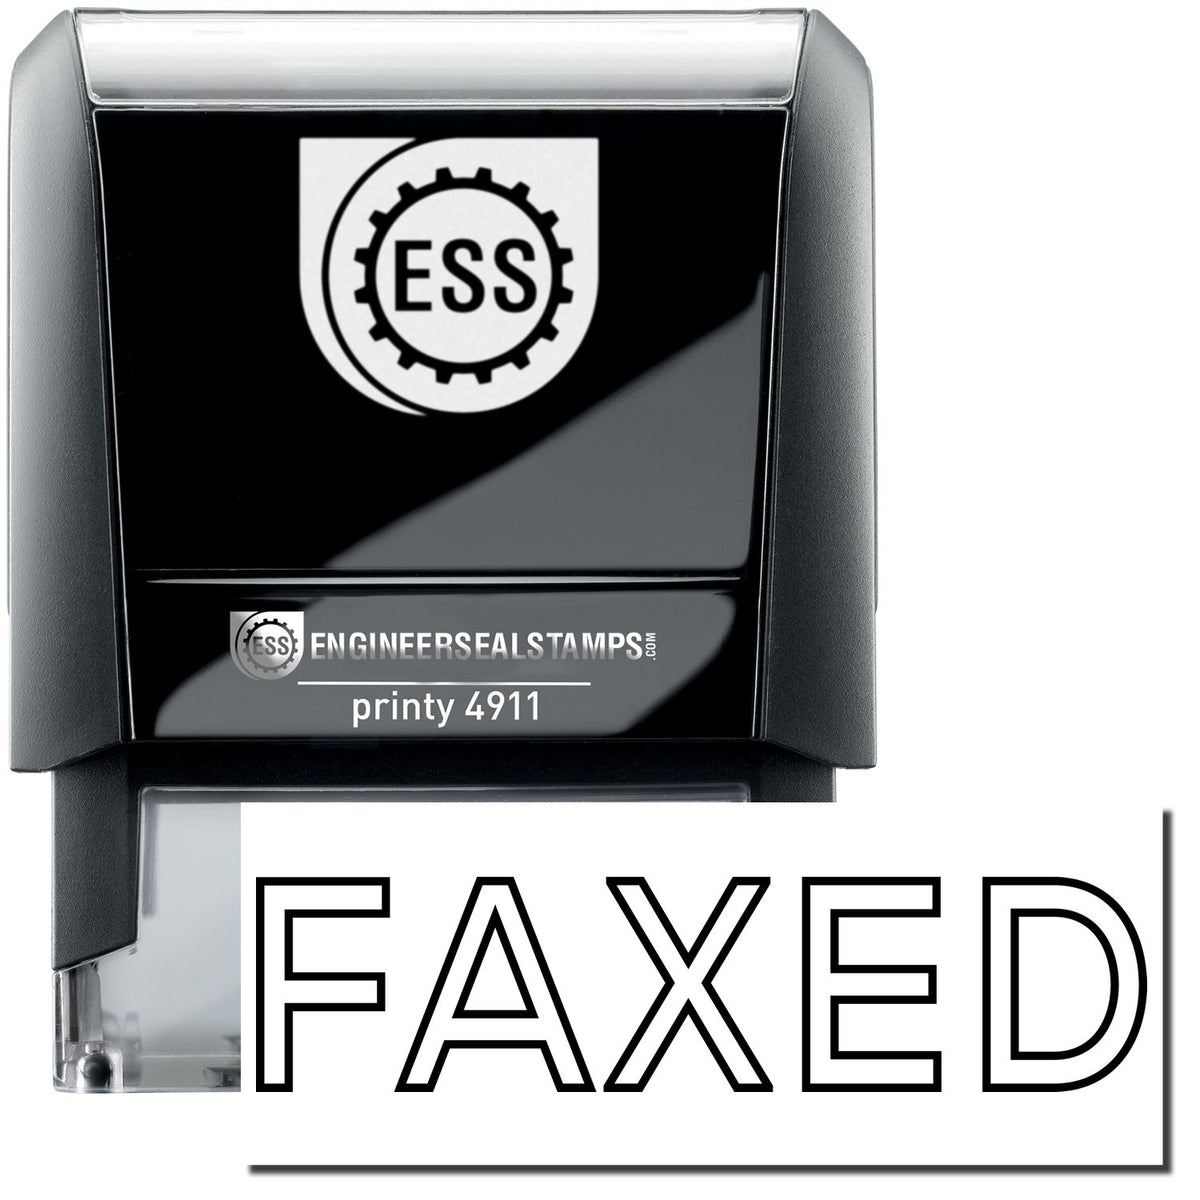 A self-inking stamp with a stamped image showing how the text &quot;FAXED&quot; in an outline style is displayed after stamping.